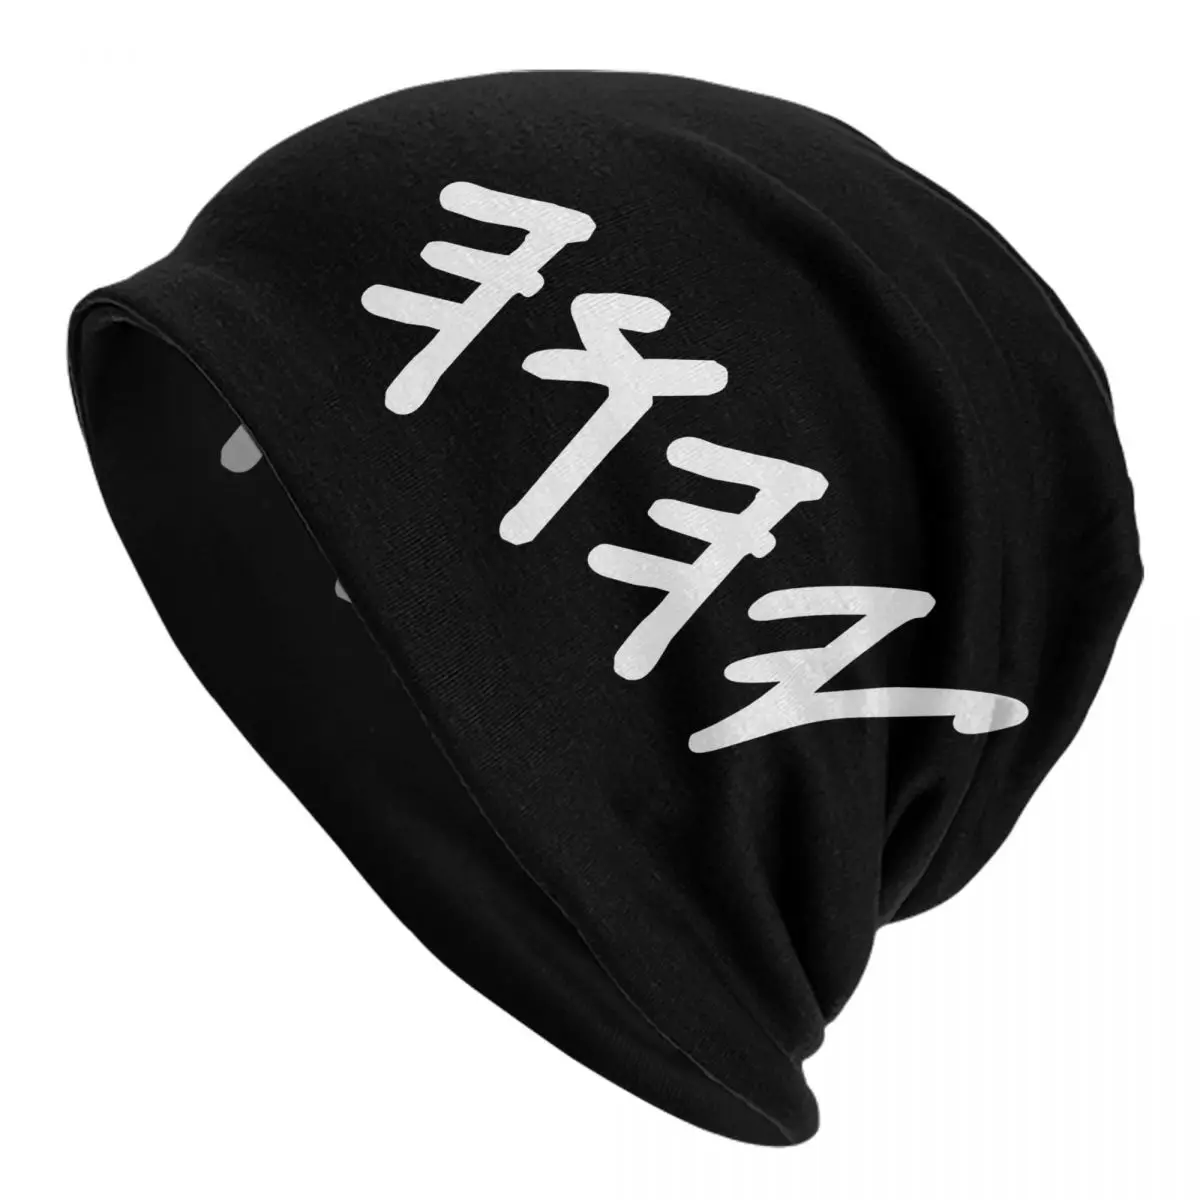 Old Hebrew Name Of God Yahuah Adult Men's Women's Knit Hat Keep warm winter Funny knitted hat